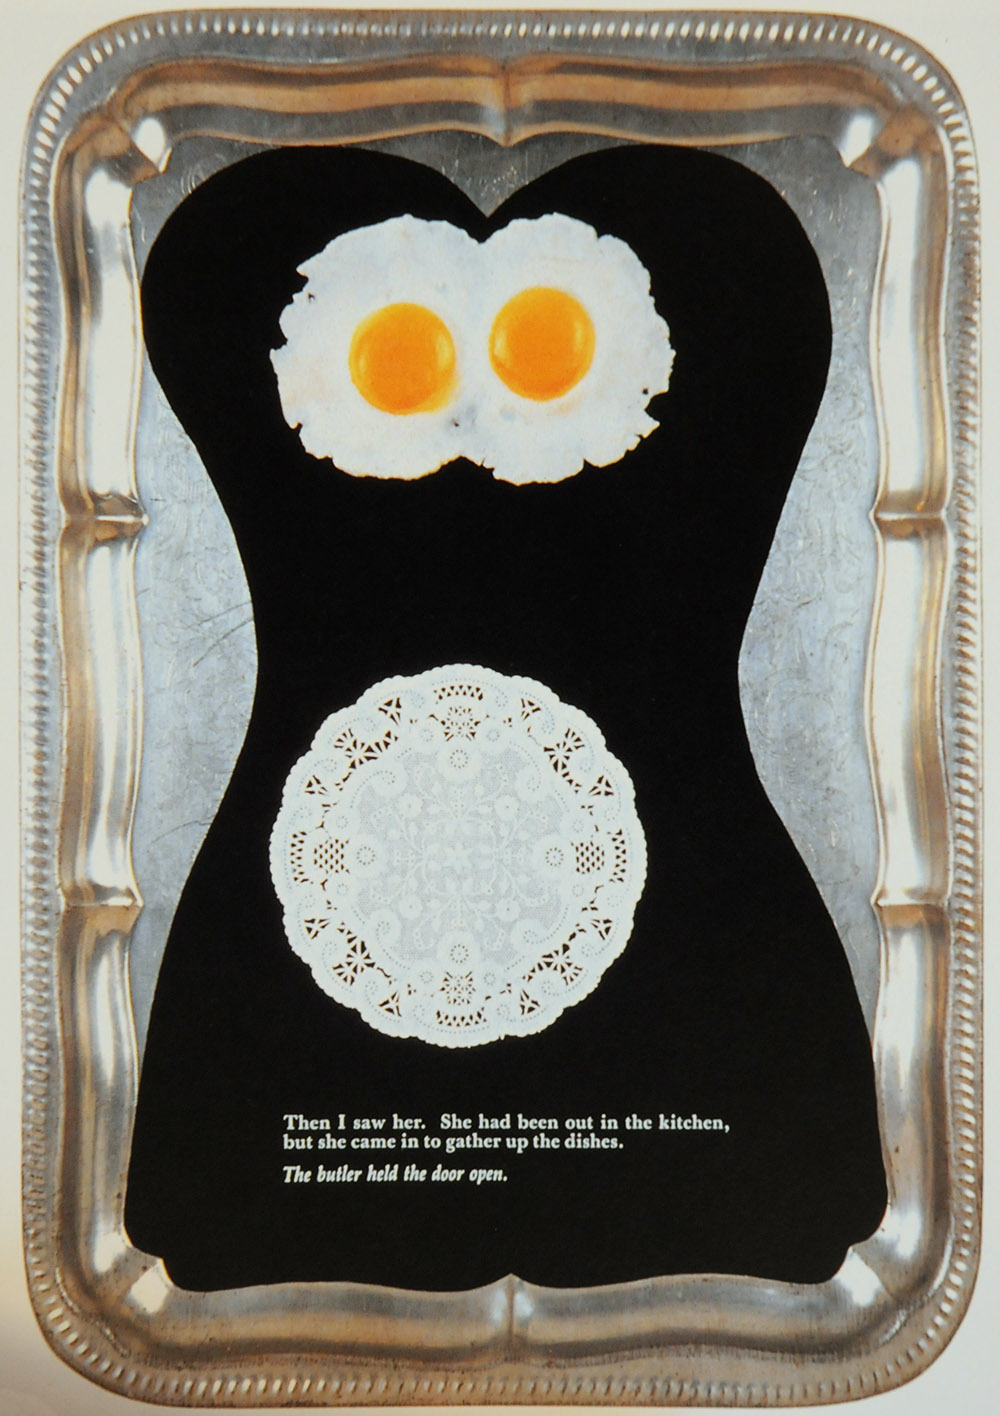 A collage / assemblage of plastic eggs on a black silhouette of a female figure all glued on a metal serving tray with pulp fiction text on the bottom. 